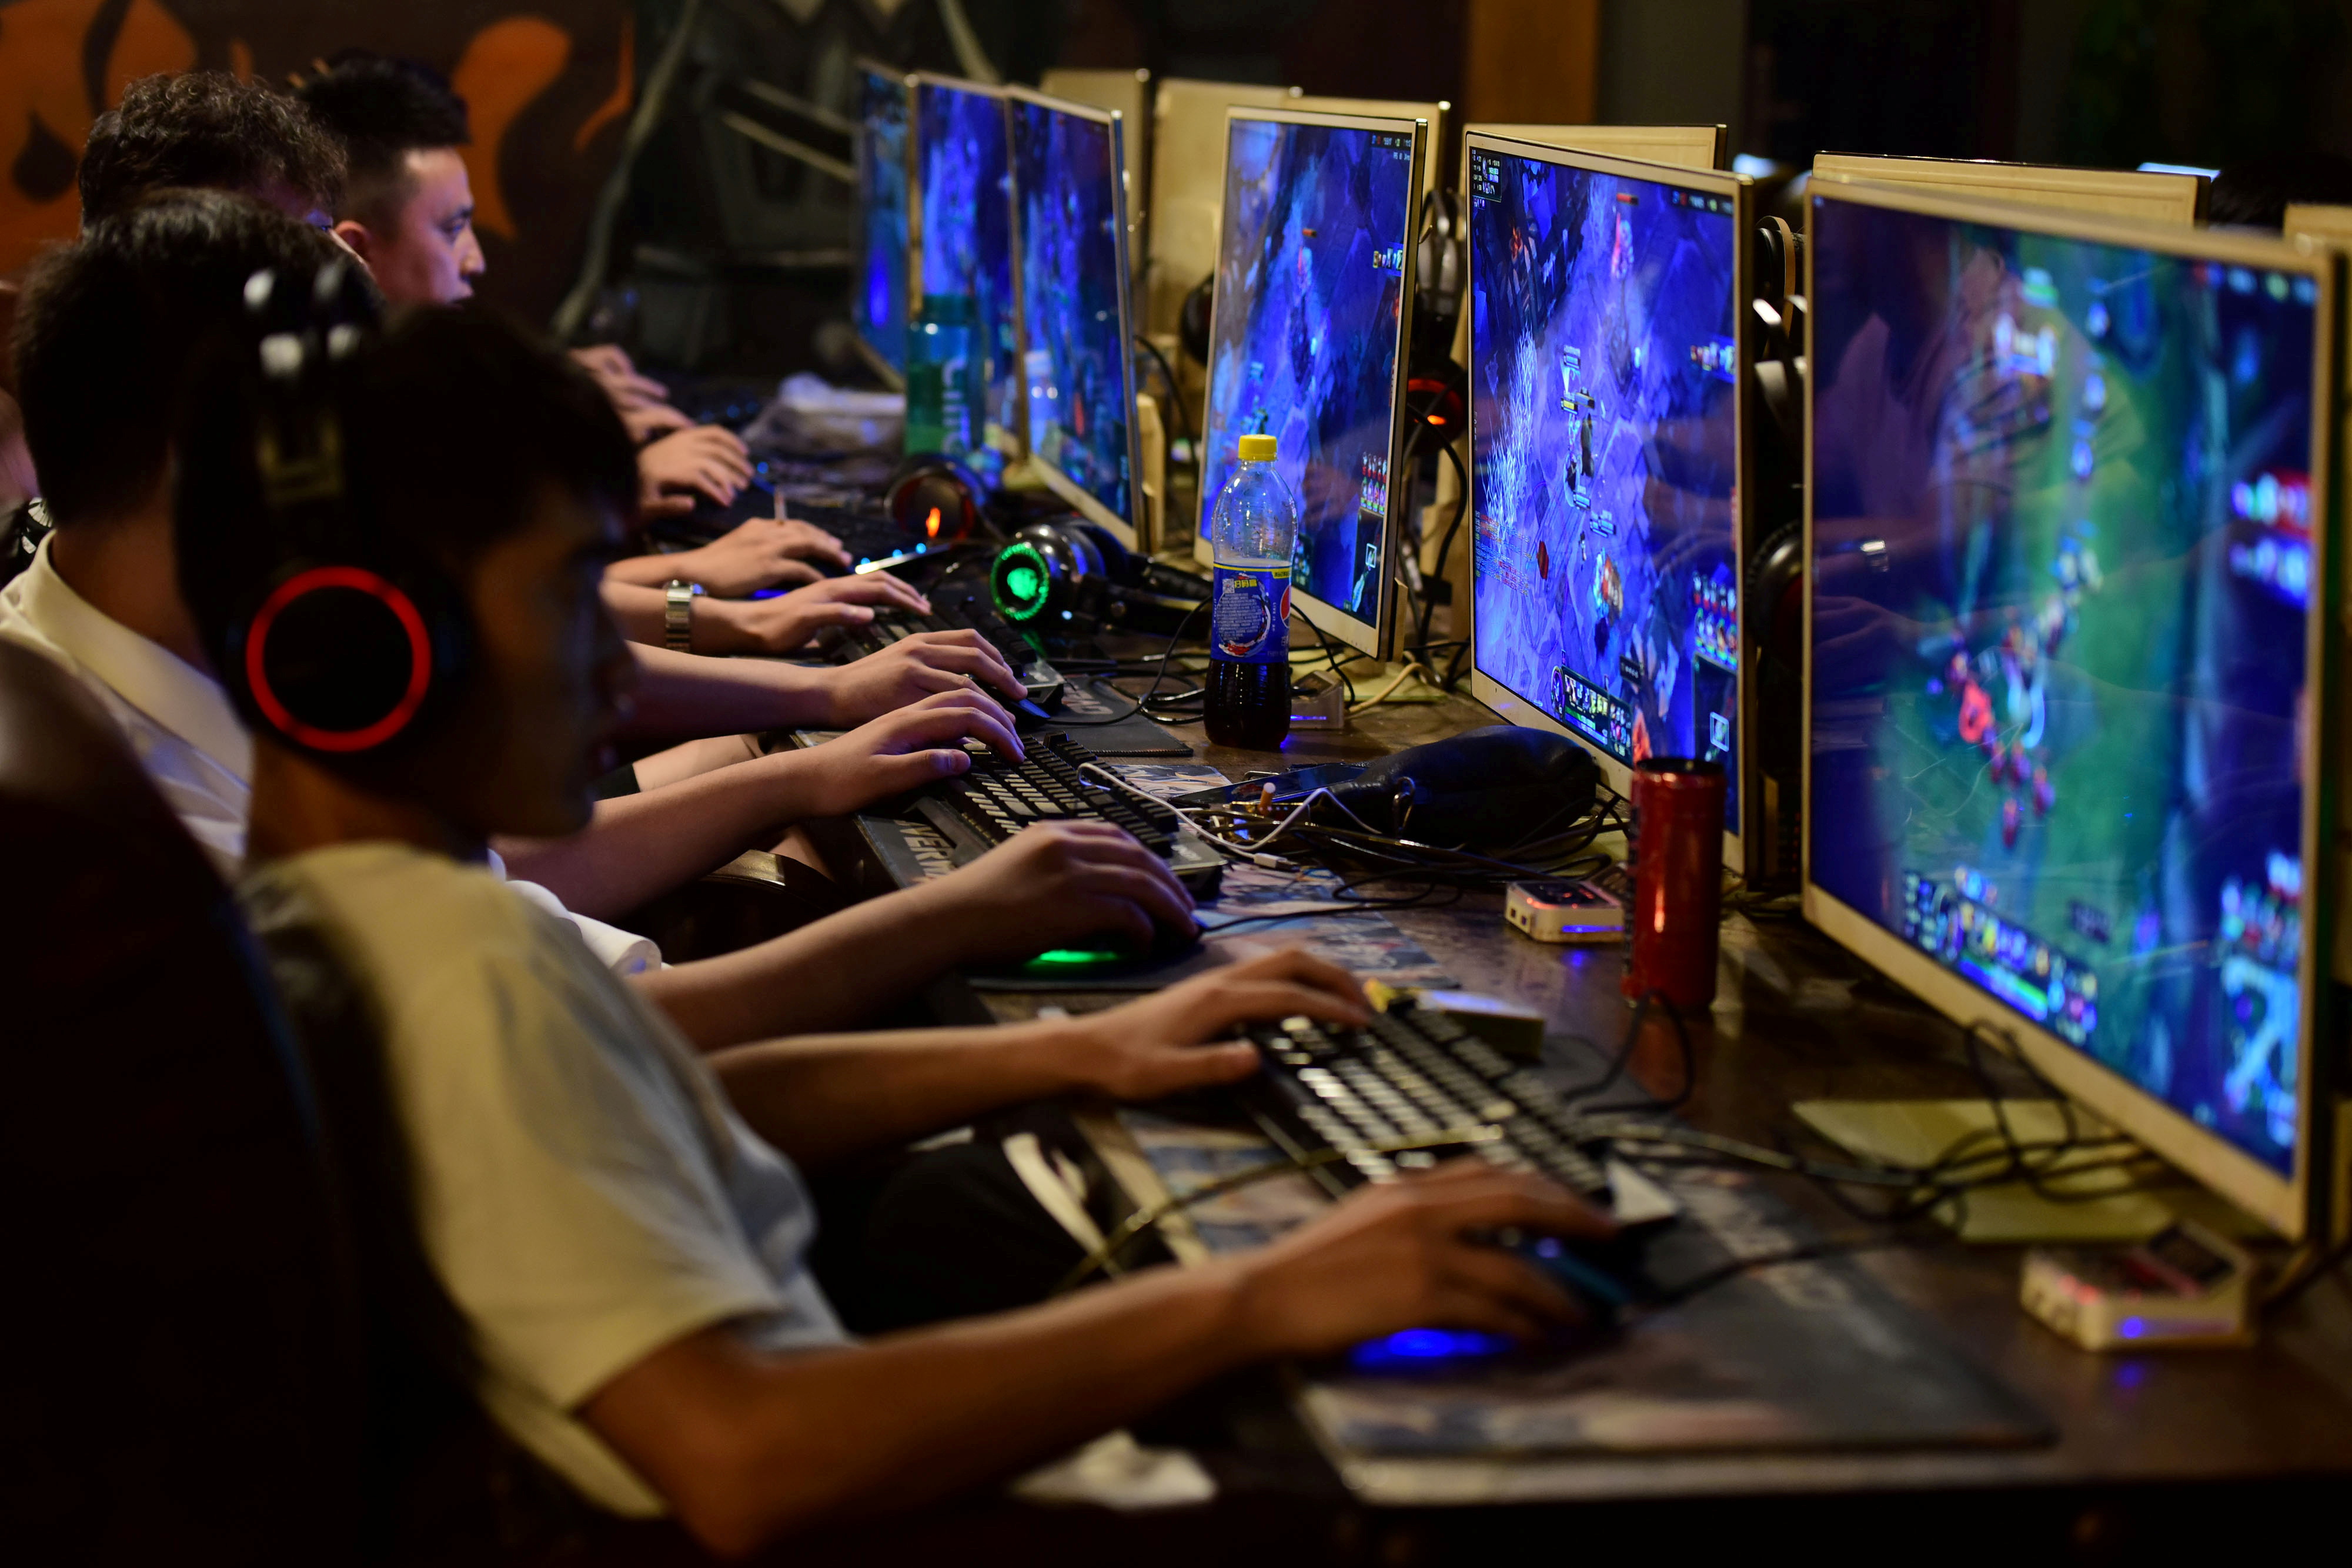 Three hours a week: Play time's over for China's young video gamers | Reuters